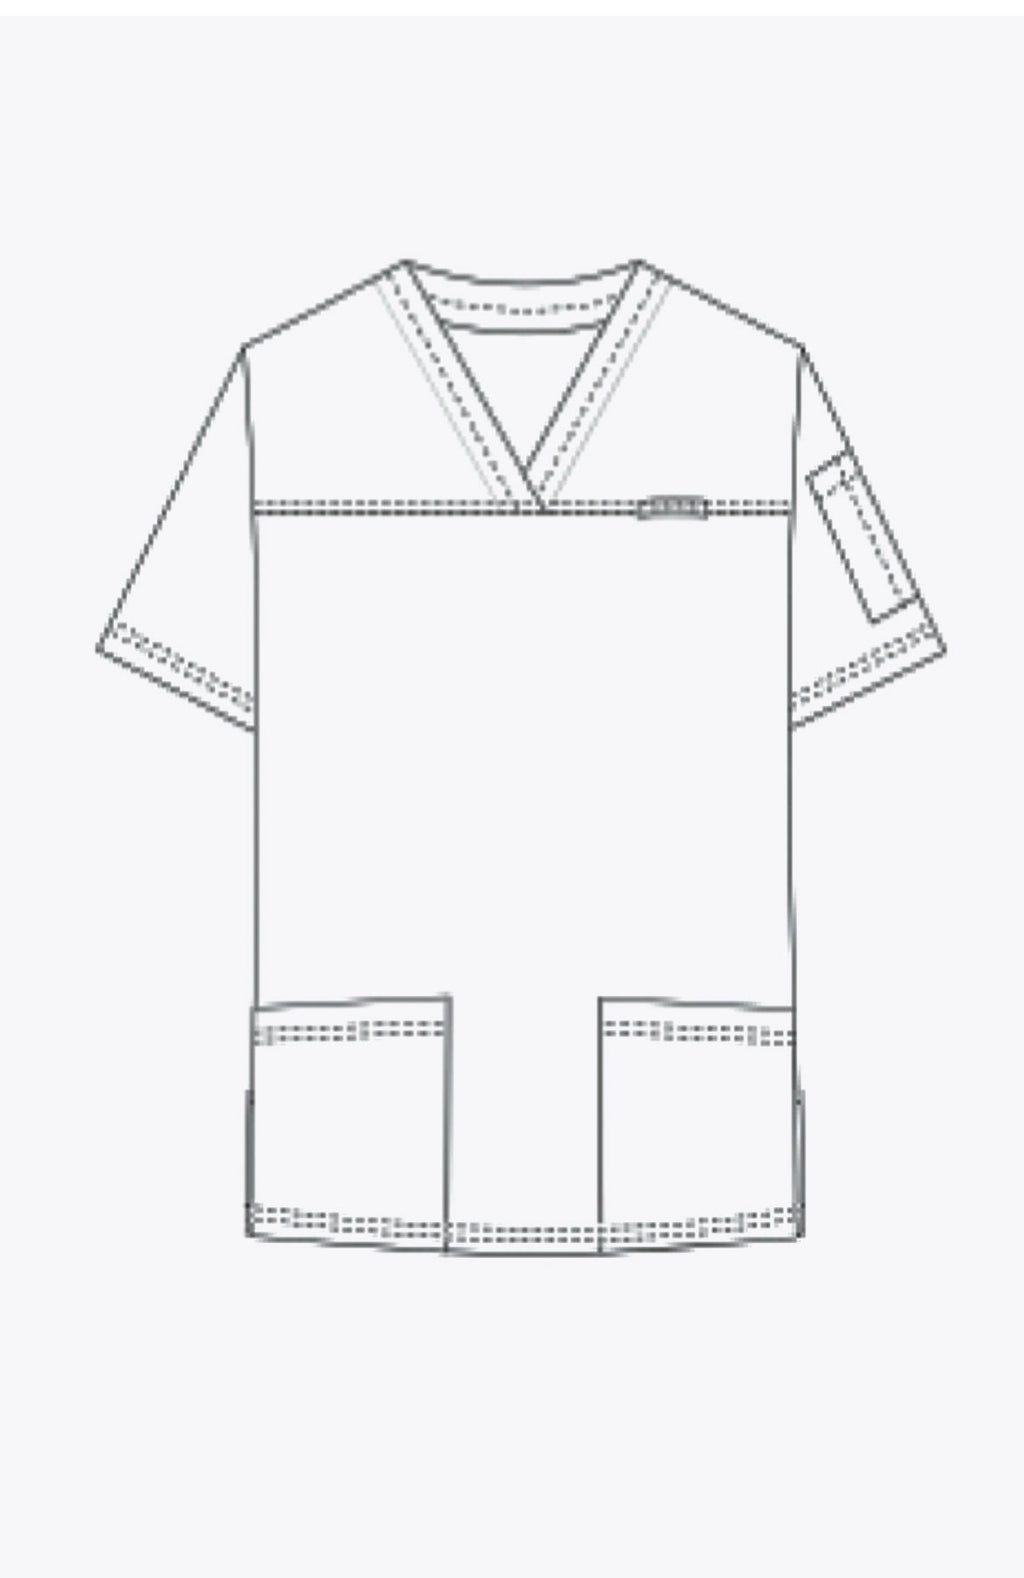 Product - The Rosey Scrub Top by MOBB